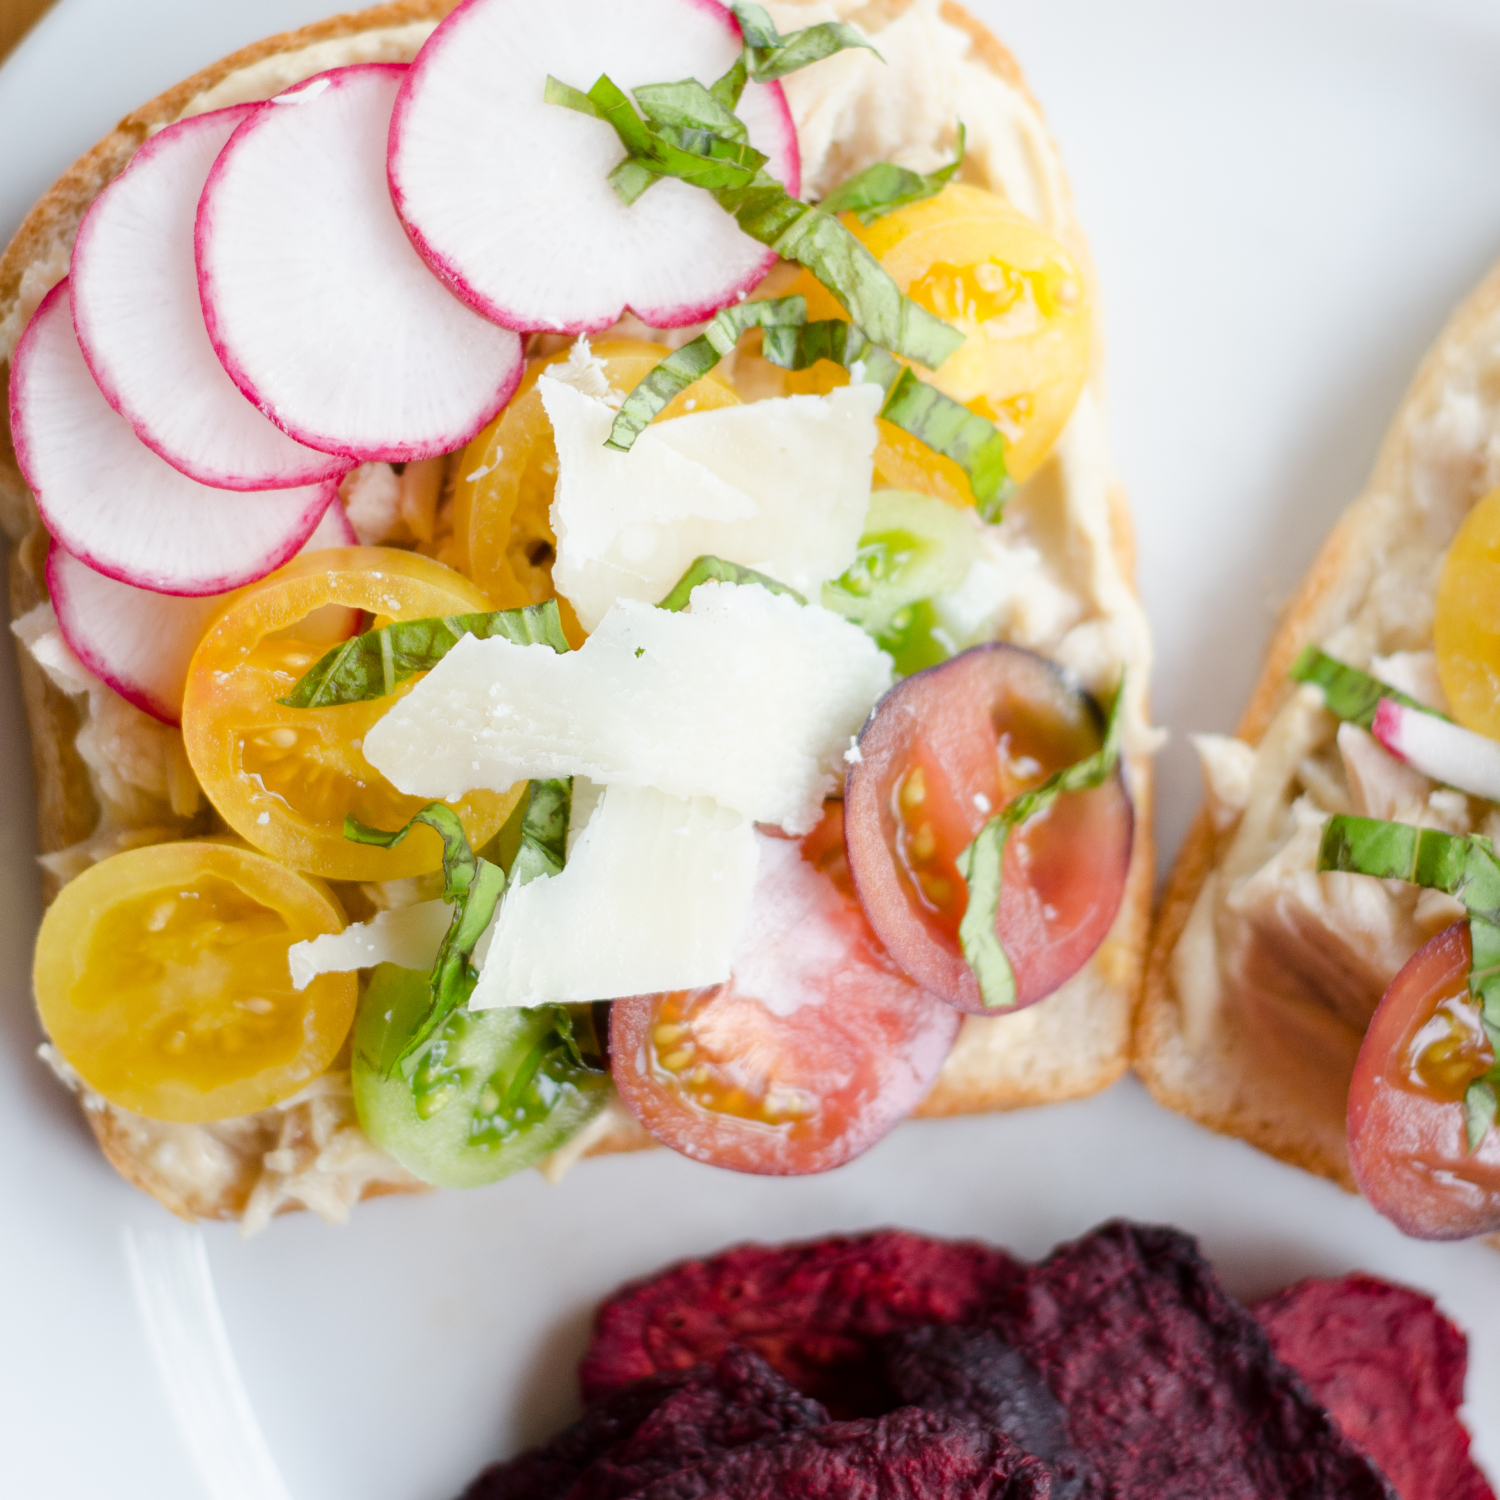 Quick and healthy lunch ideas - try these open faced sandwiches next time you're wondering what to eat for lunch. They're all super fast to make, taste amazing, and will keep you full all afternoon!